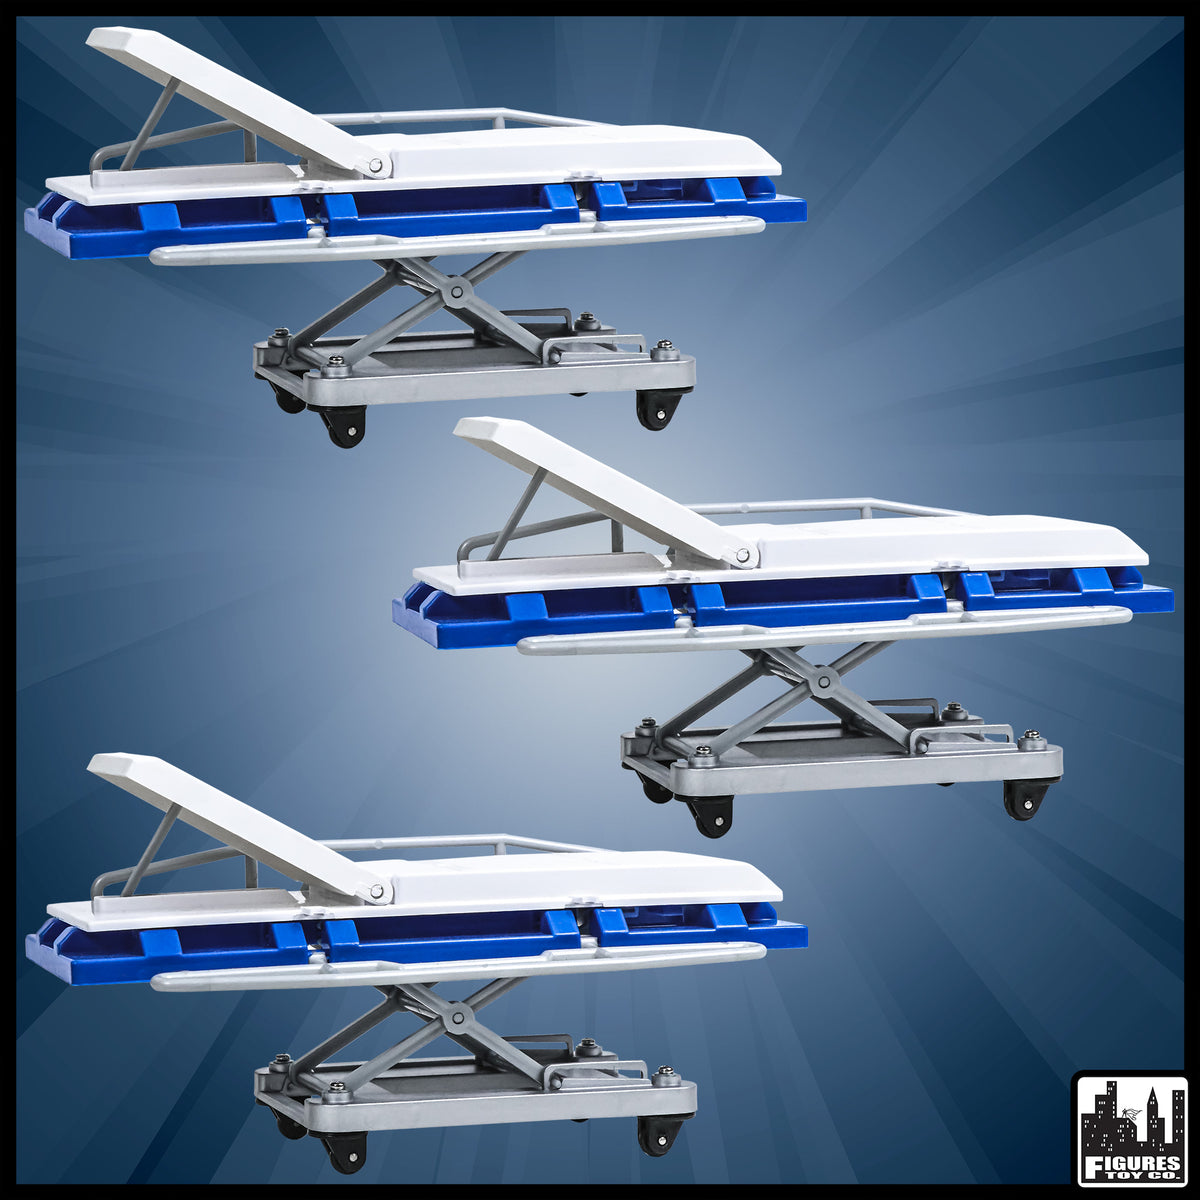 Set of 3 Blue and White Deluxe Moving Stretchers for WWE Wrestling Action Figures